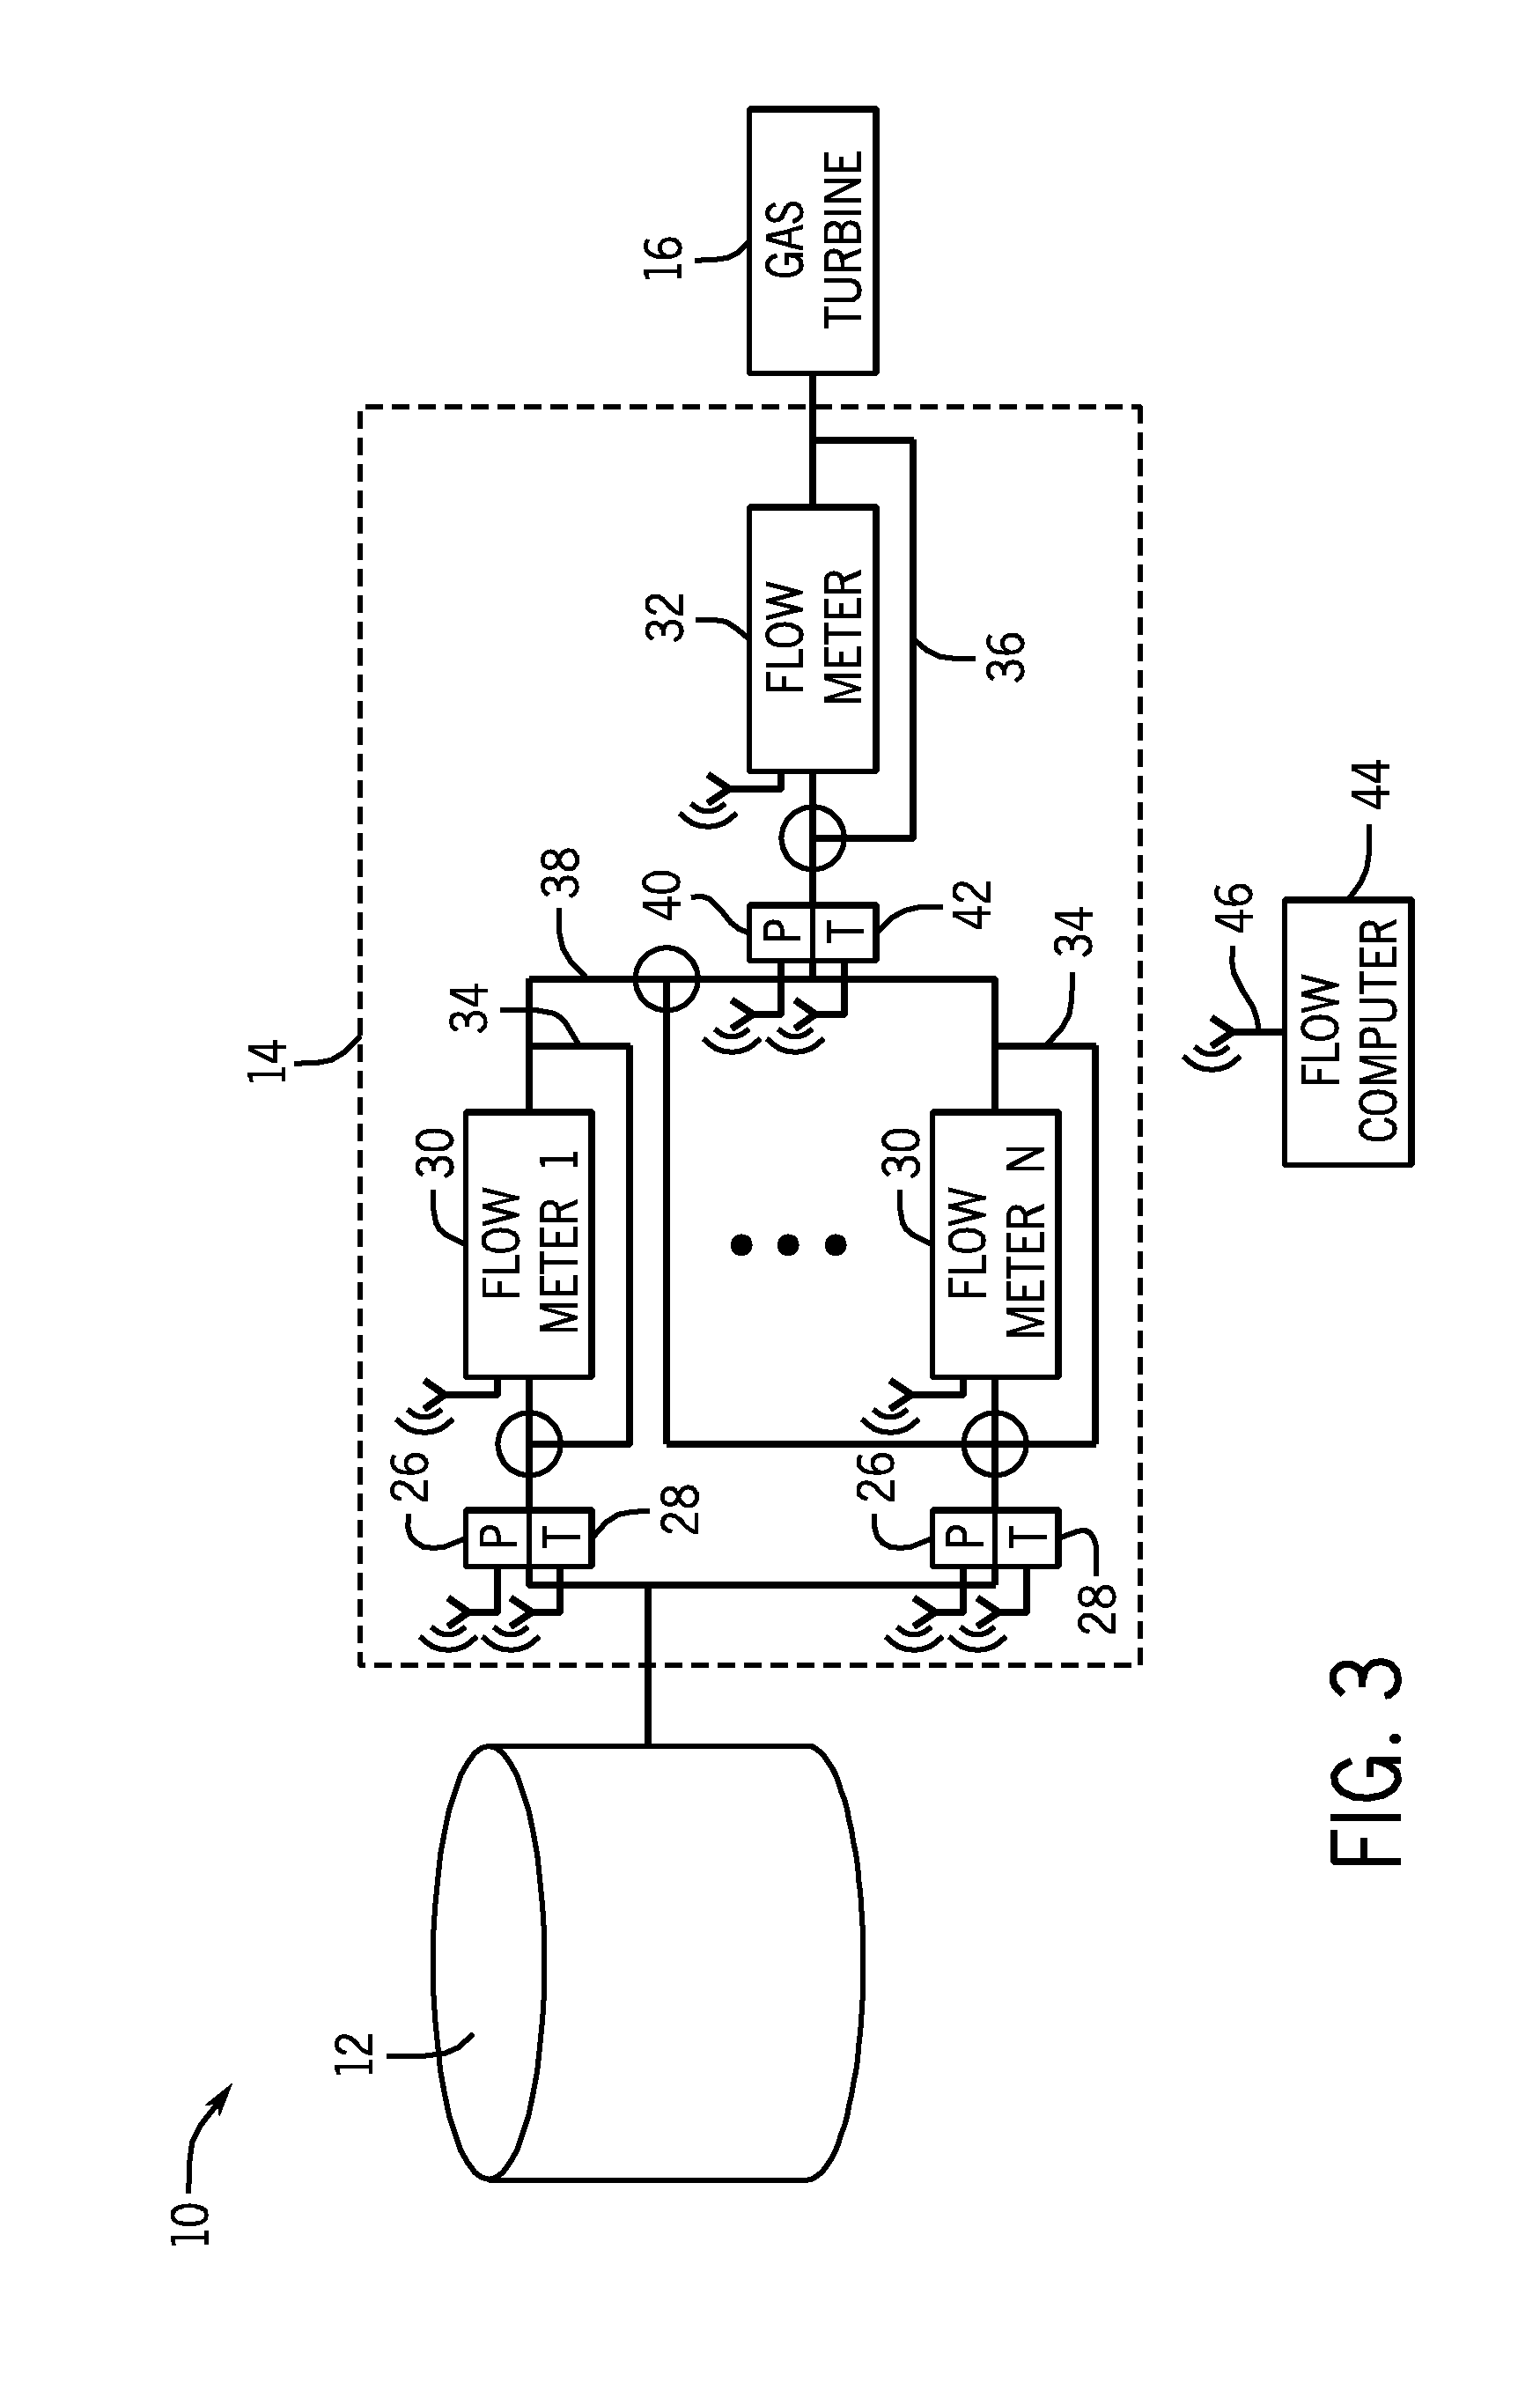 Custody transfer system and method for gas fuel